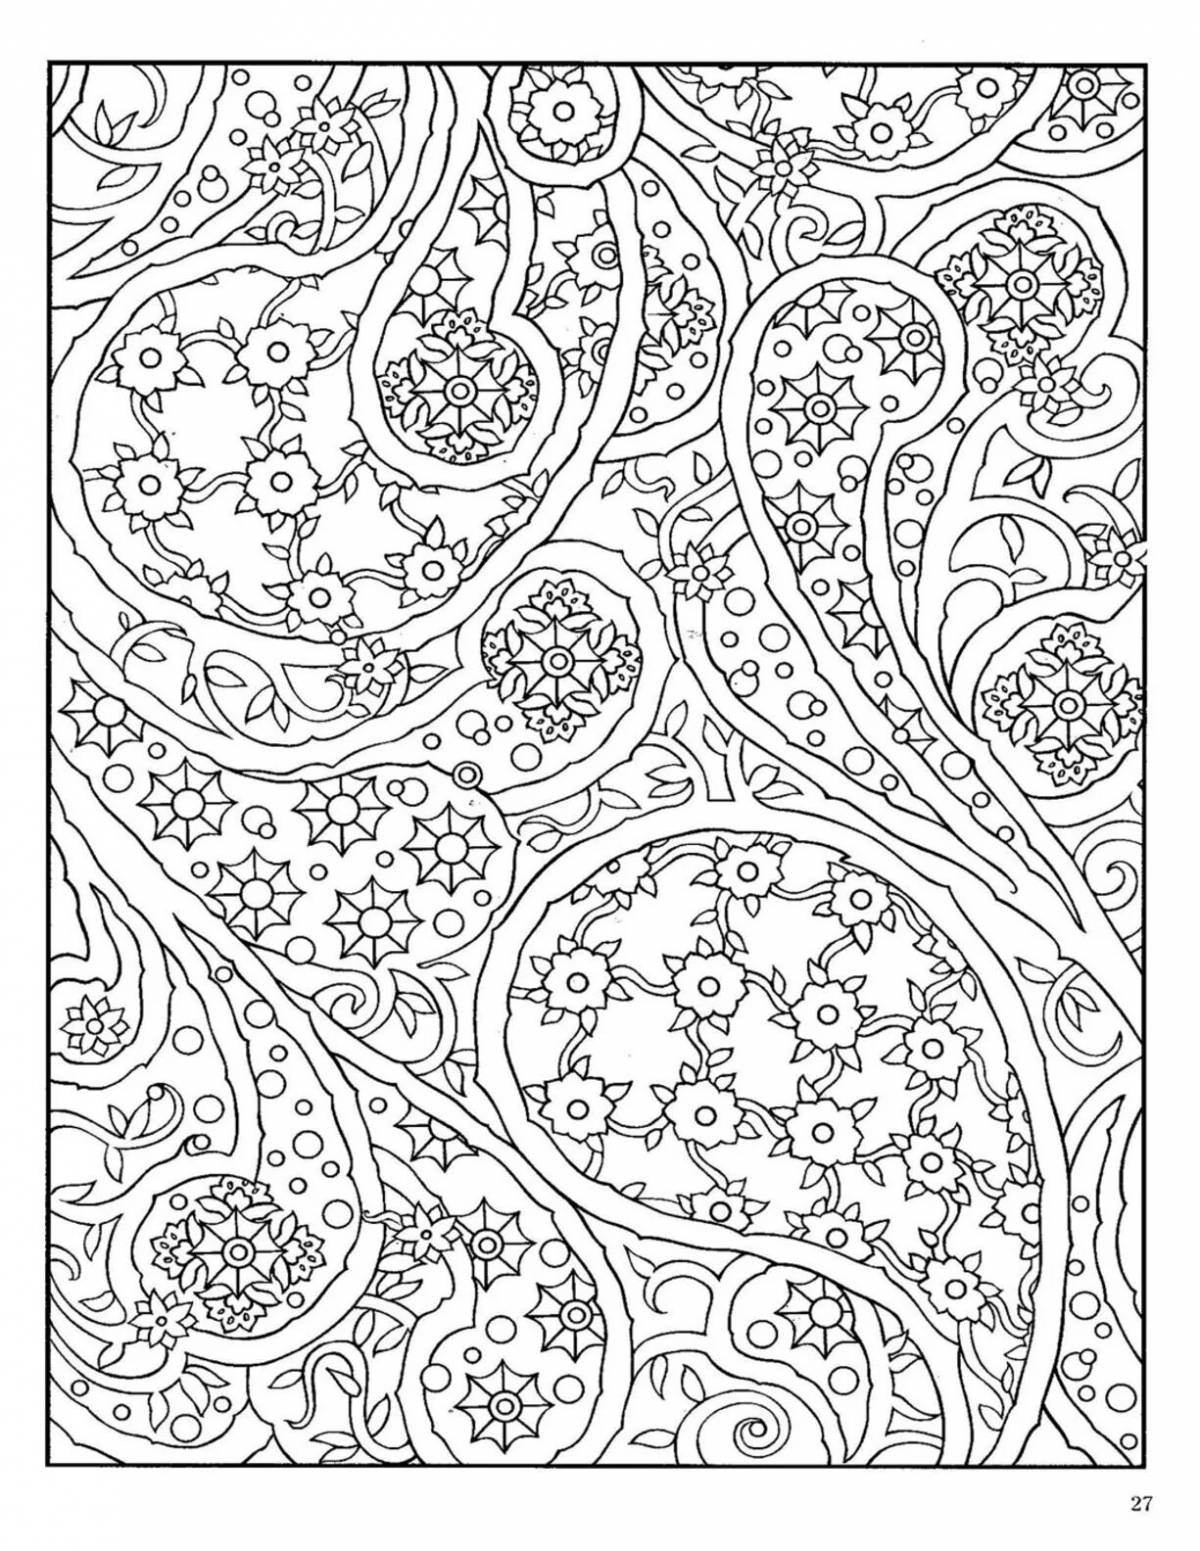 Soothing soothing coloring pages